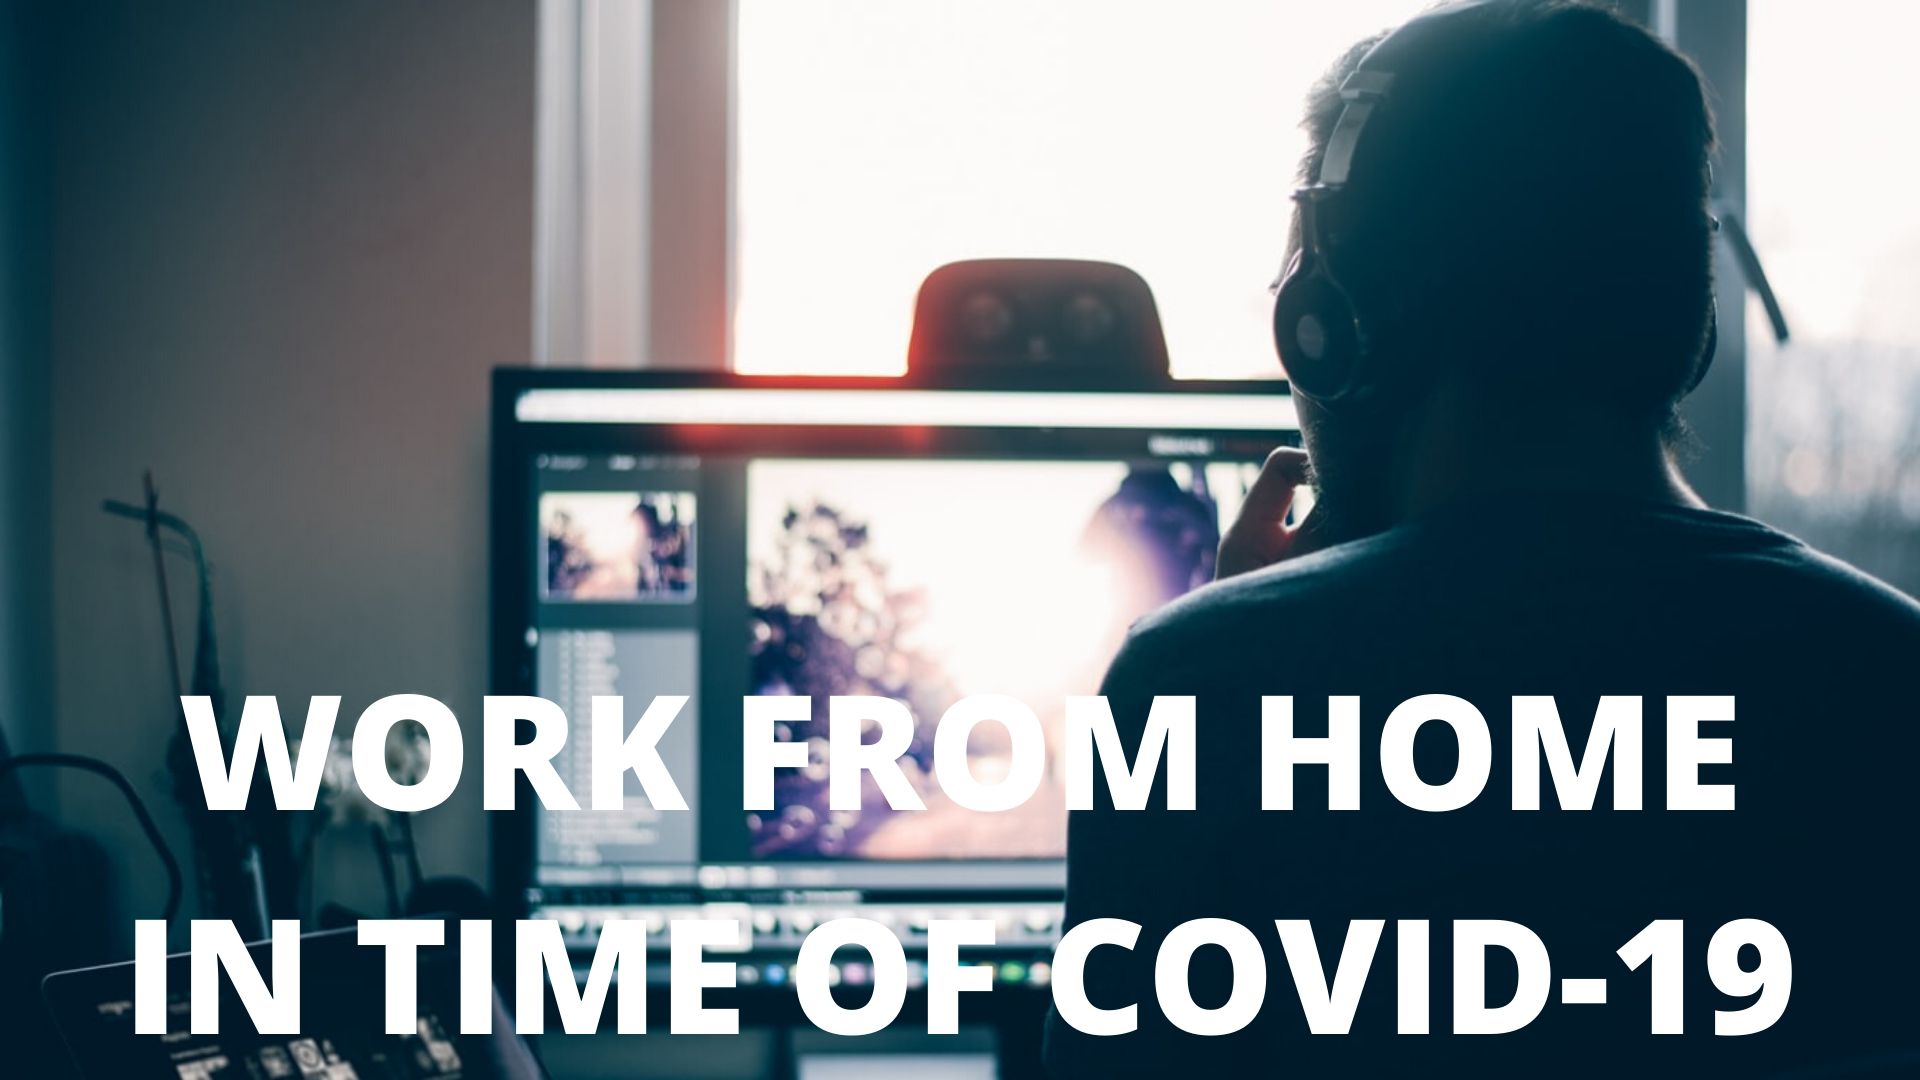 Work from home in time of COVID-19